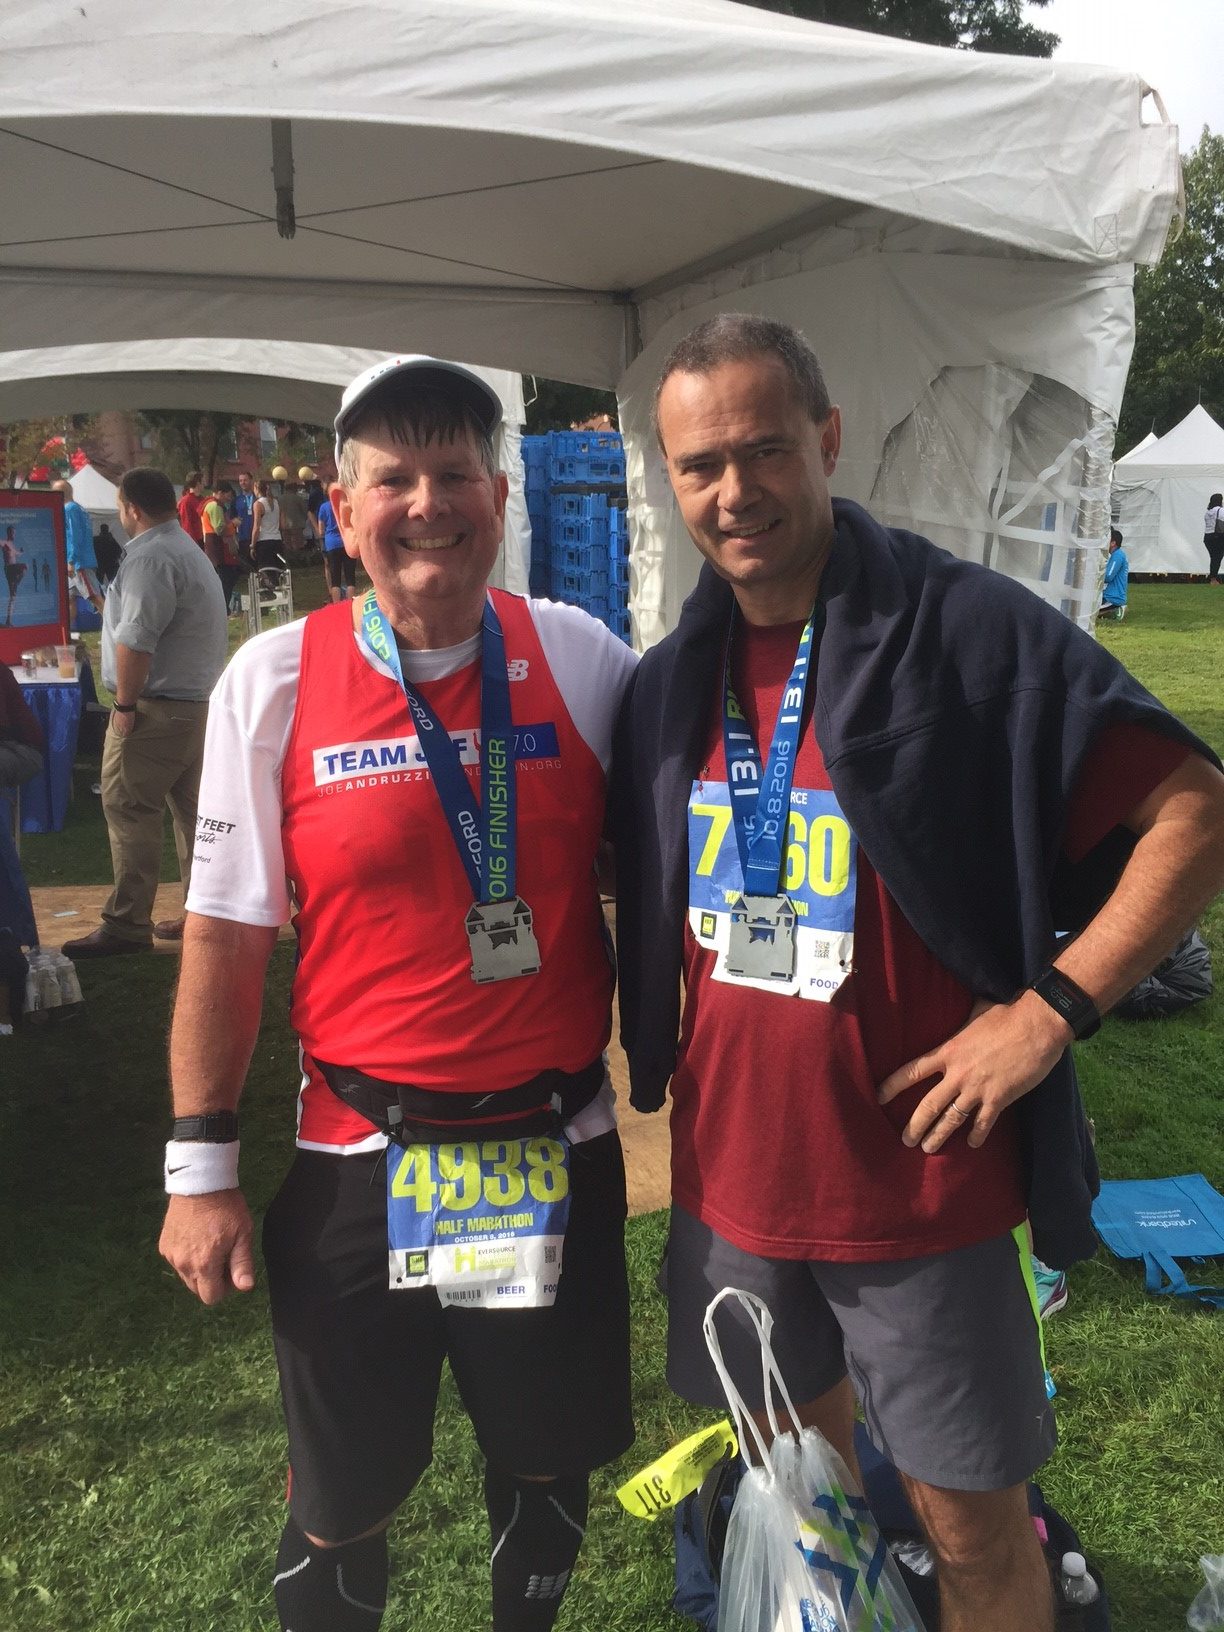 "We had a great time," said Calhoun Cardiology Center patient Bill Donovan, heart attack and cardiac arrest survivor who ran the Hartford Half Marathon for the second time with his cardiologist. "Dr. Heiko Schmitt's time was 2:02 and mine was 2:47. We were both happy with our results."